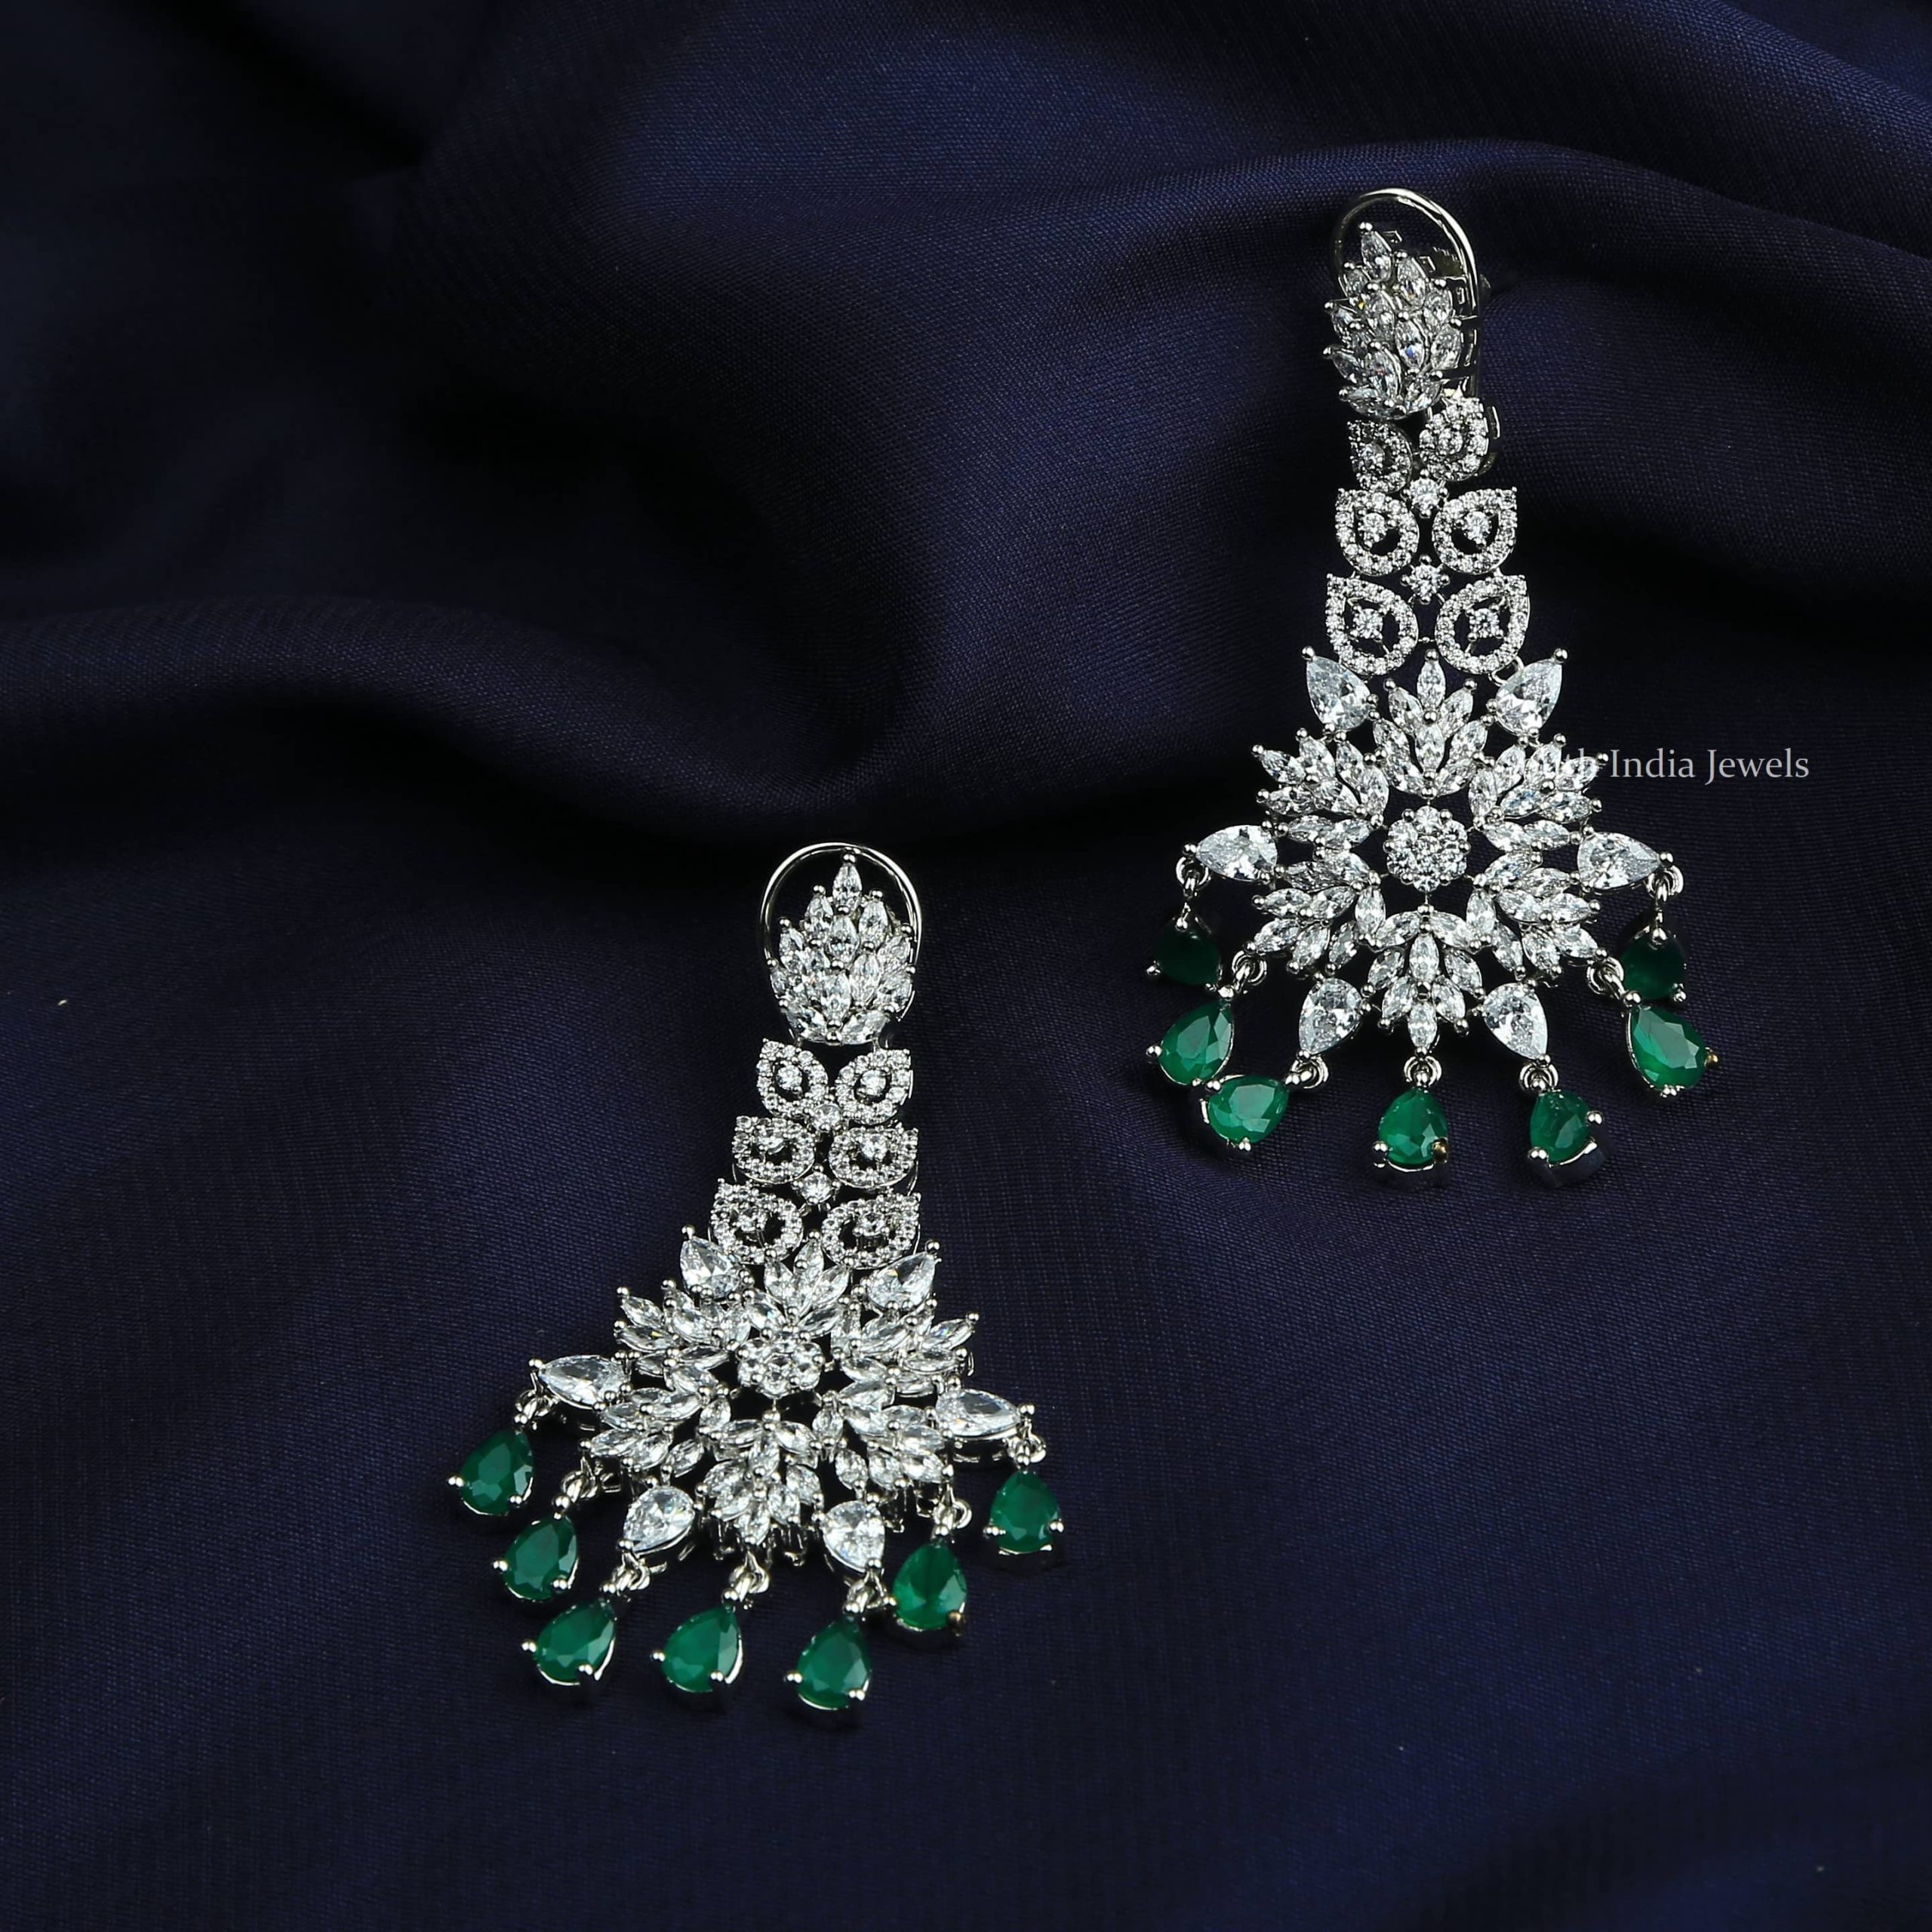 Contemperary White Gold Earrings